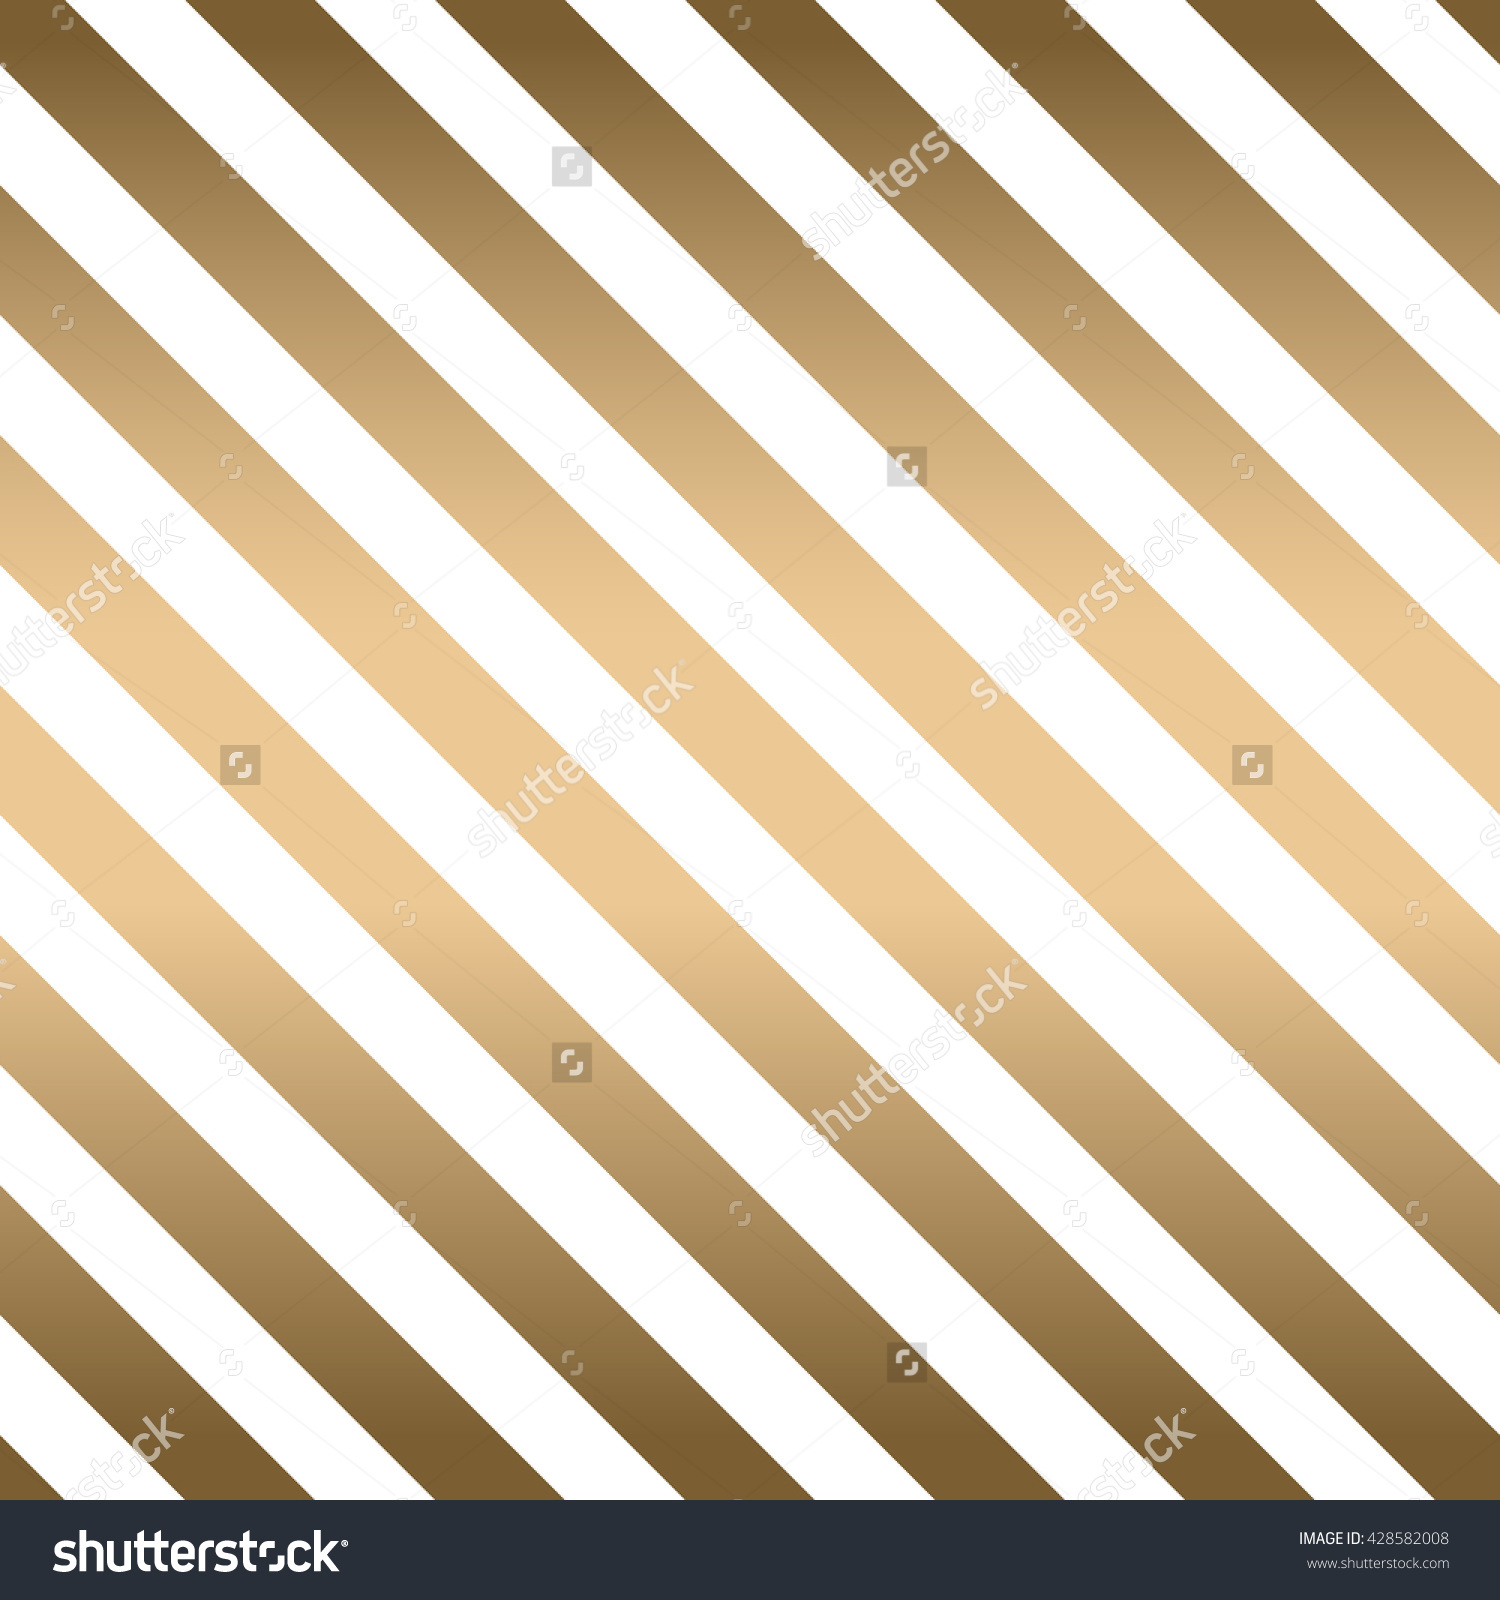 stock-vector-classic-diagonal-lines-pattern-on-white-background-vector-design-gold-diagonal-428582008.jpg